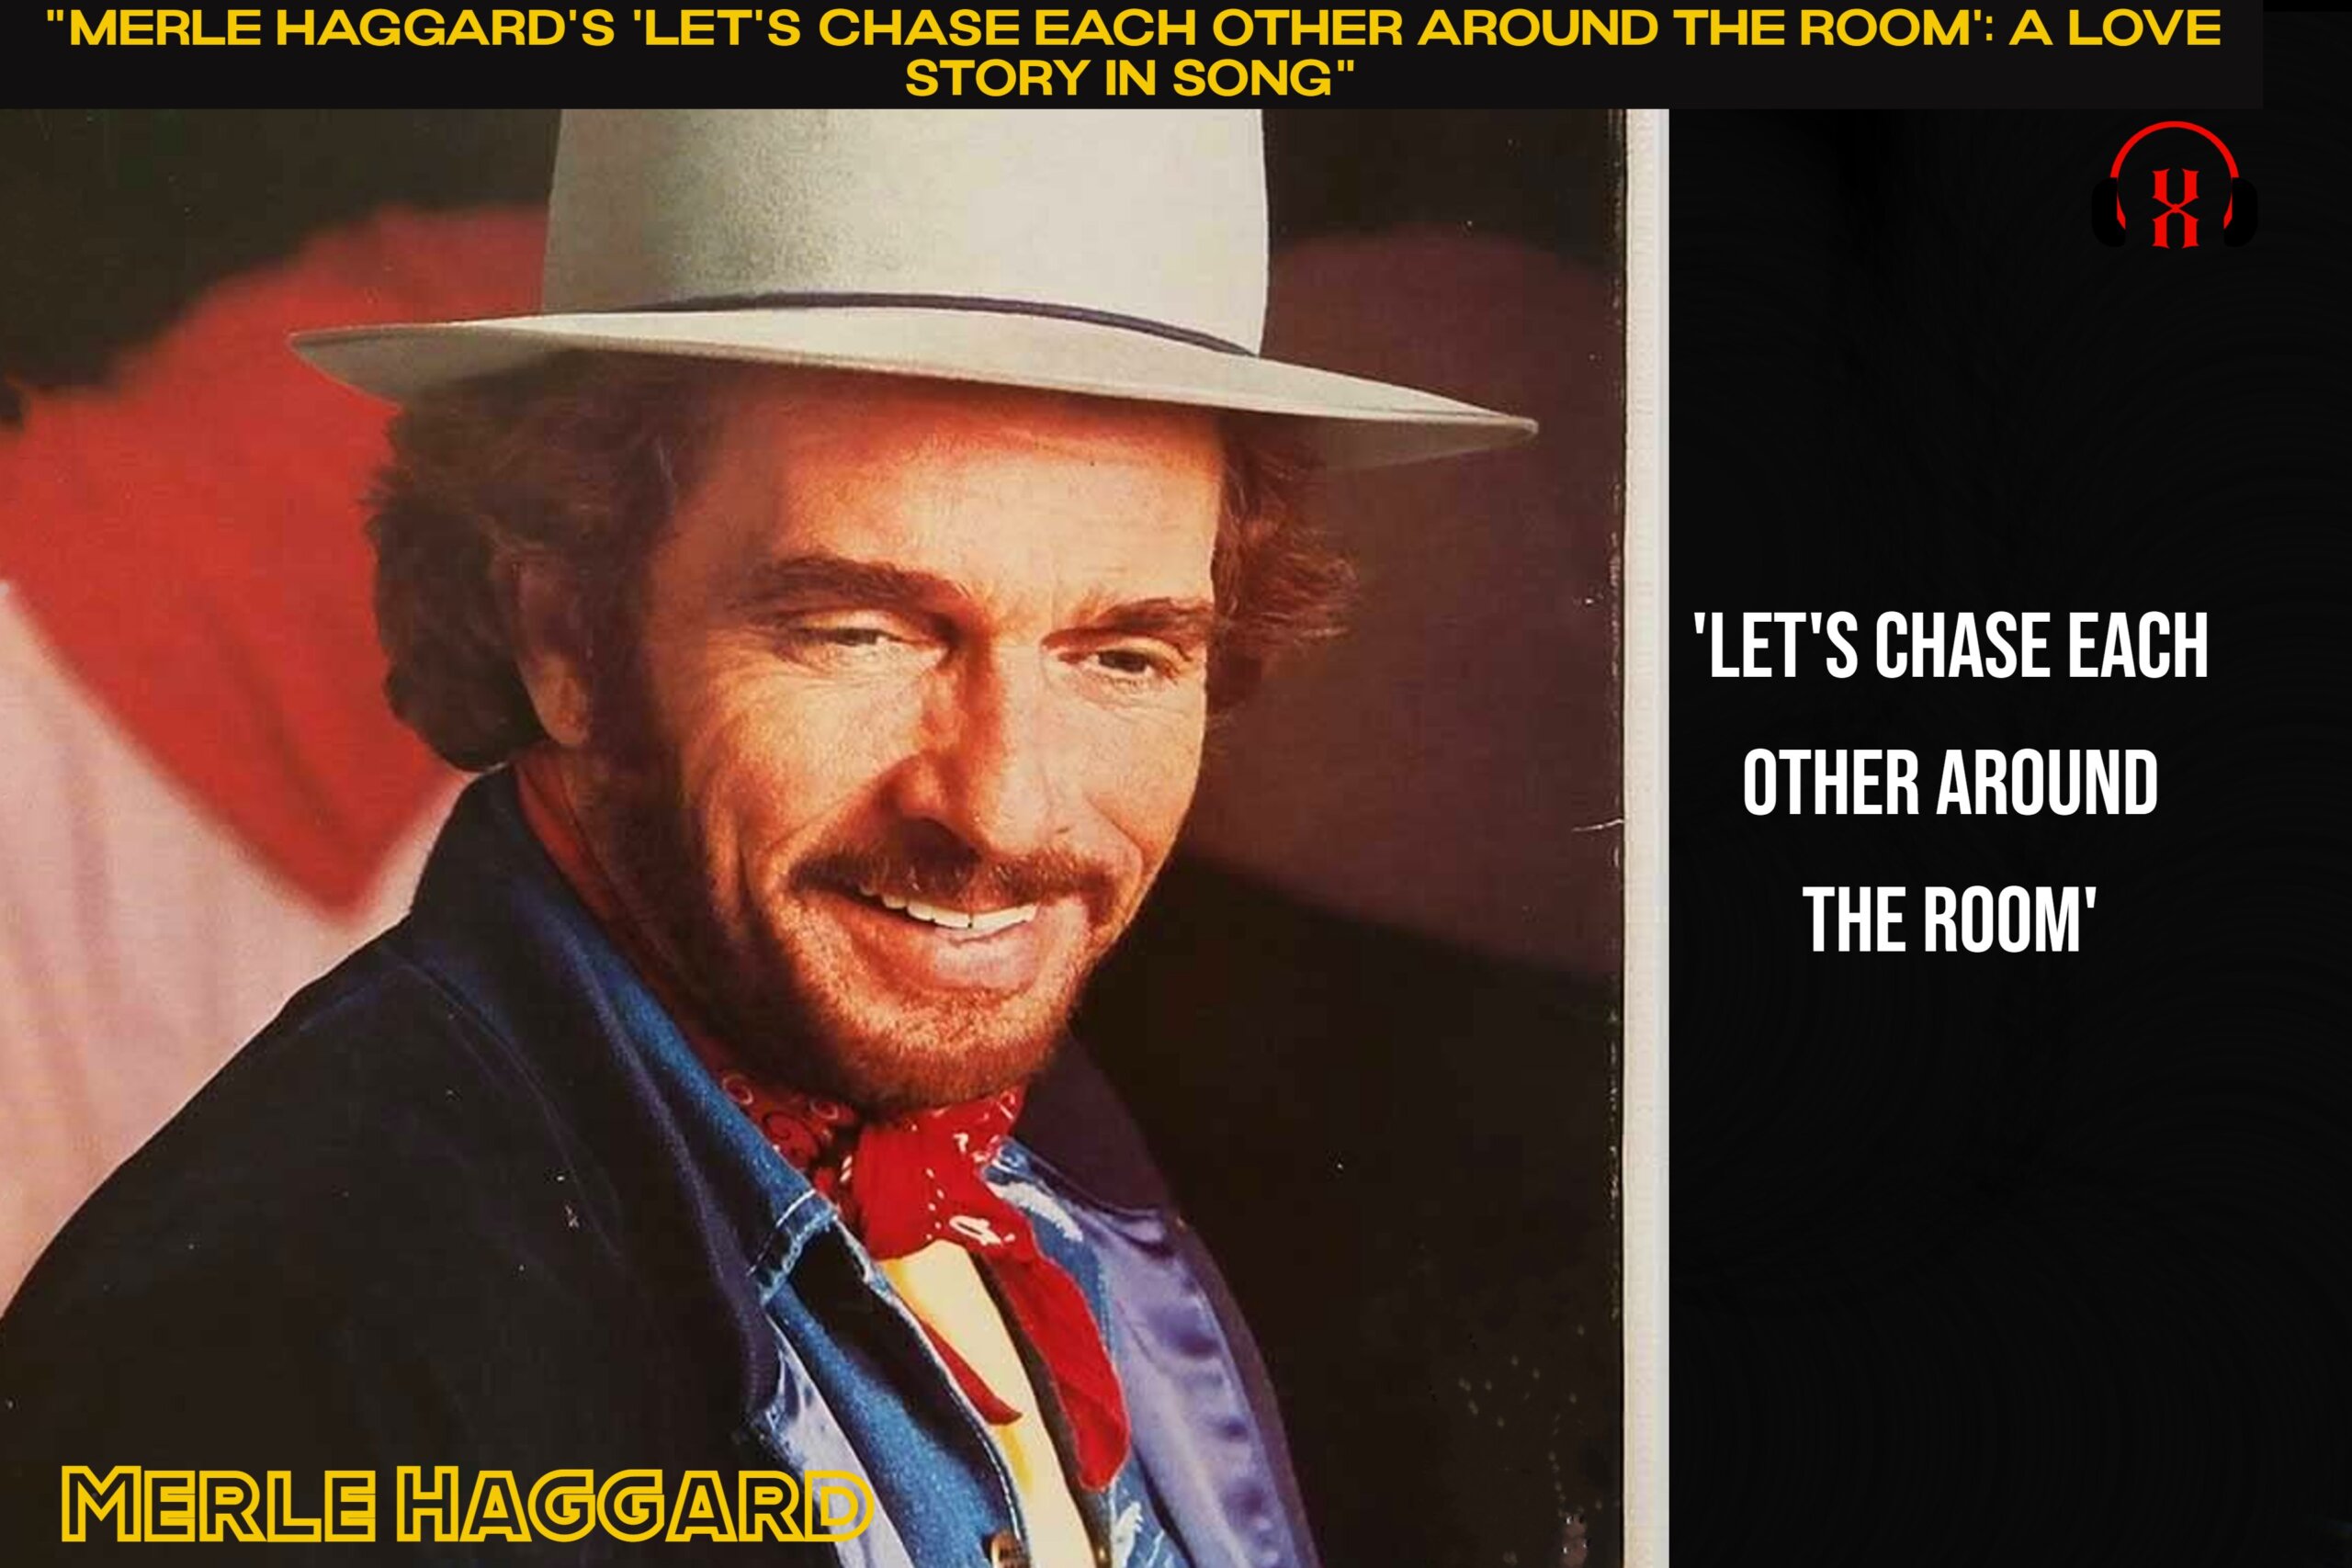 "Merle Haggard's 'Let's Chase Each Other Around The Room': A Love Story in Song"